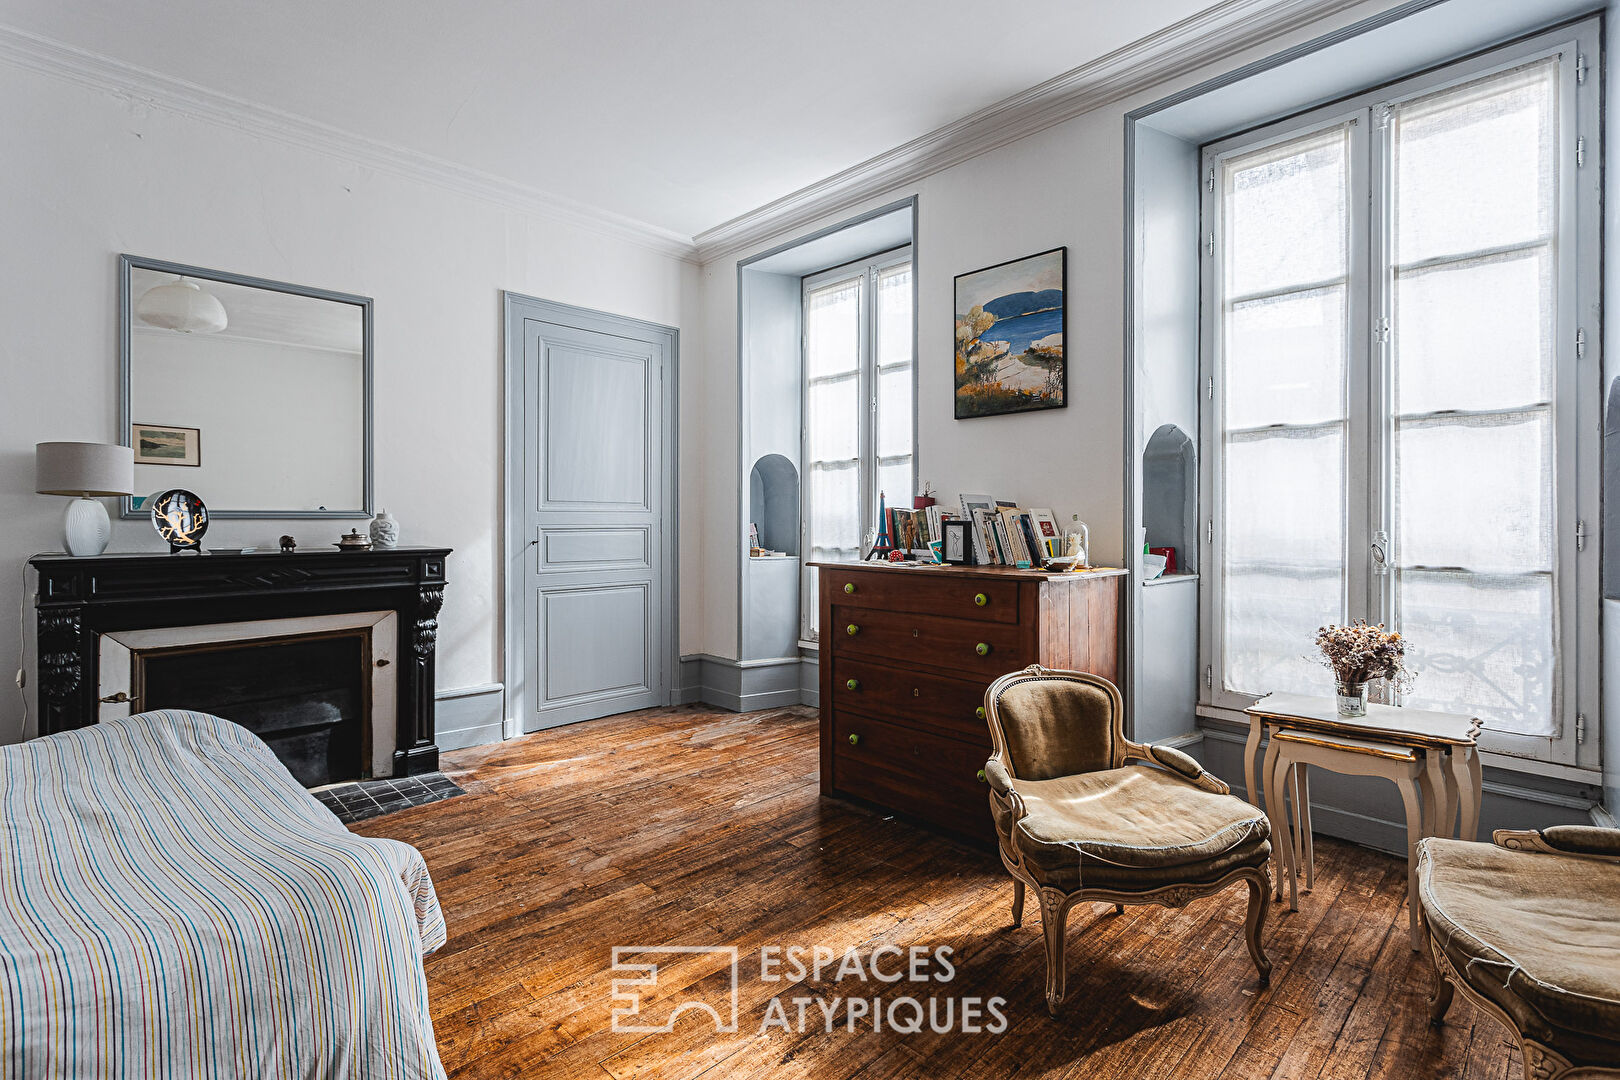 Exceptional bourgeois residence in the very center of Niort